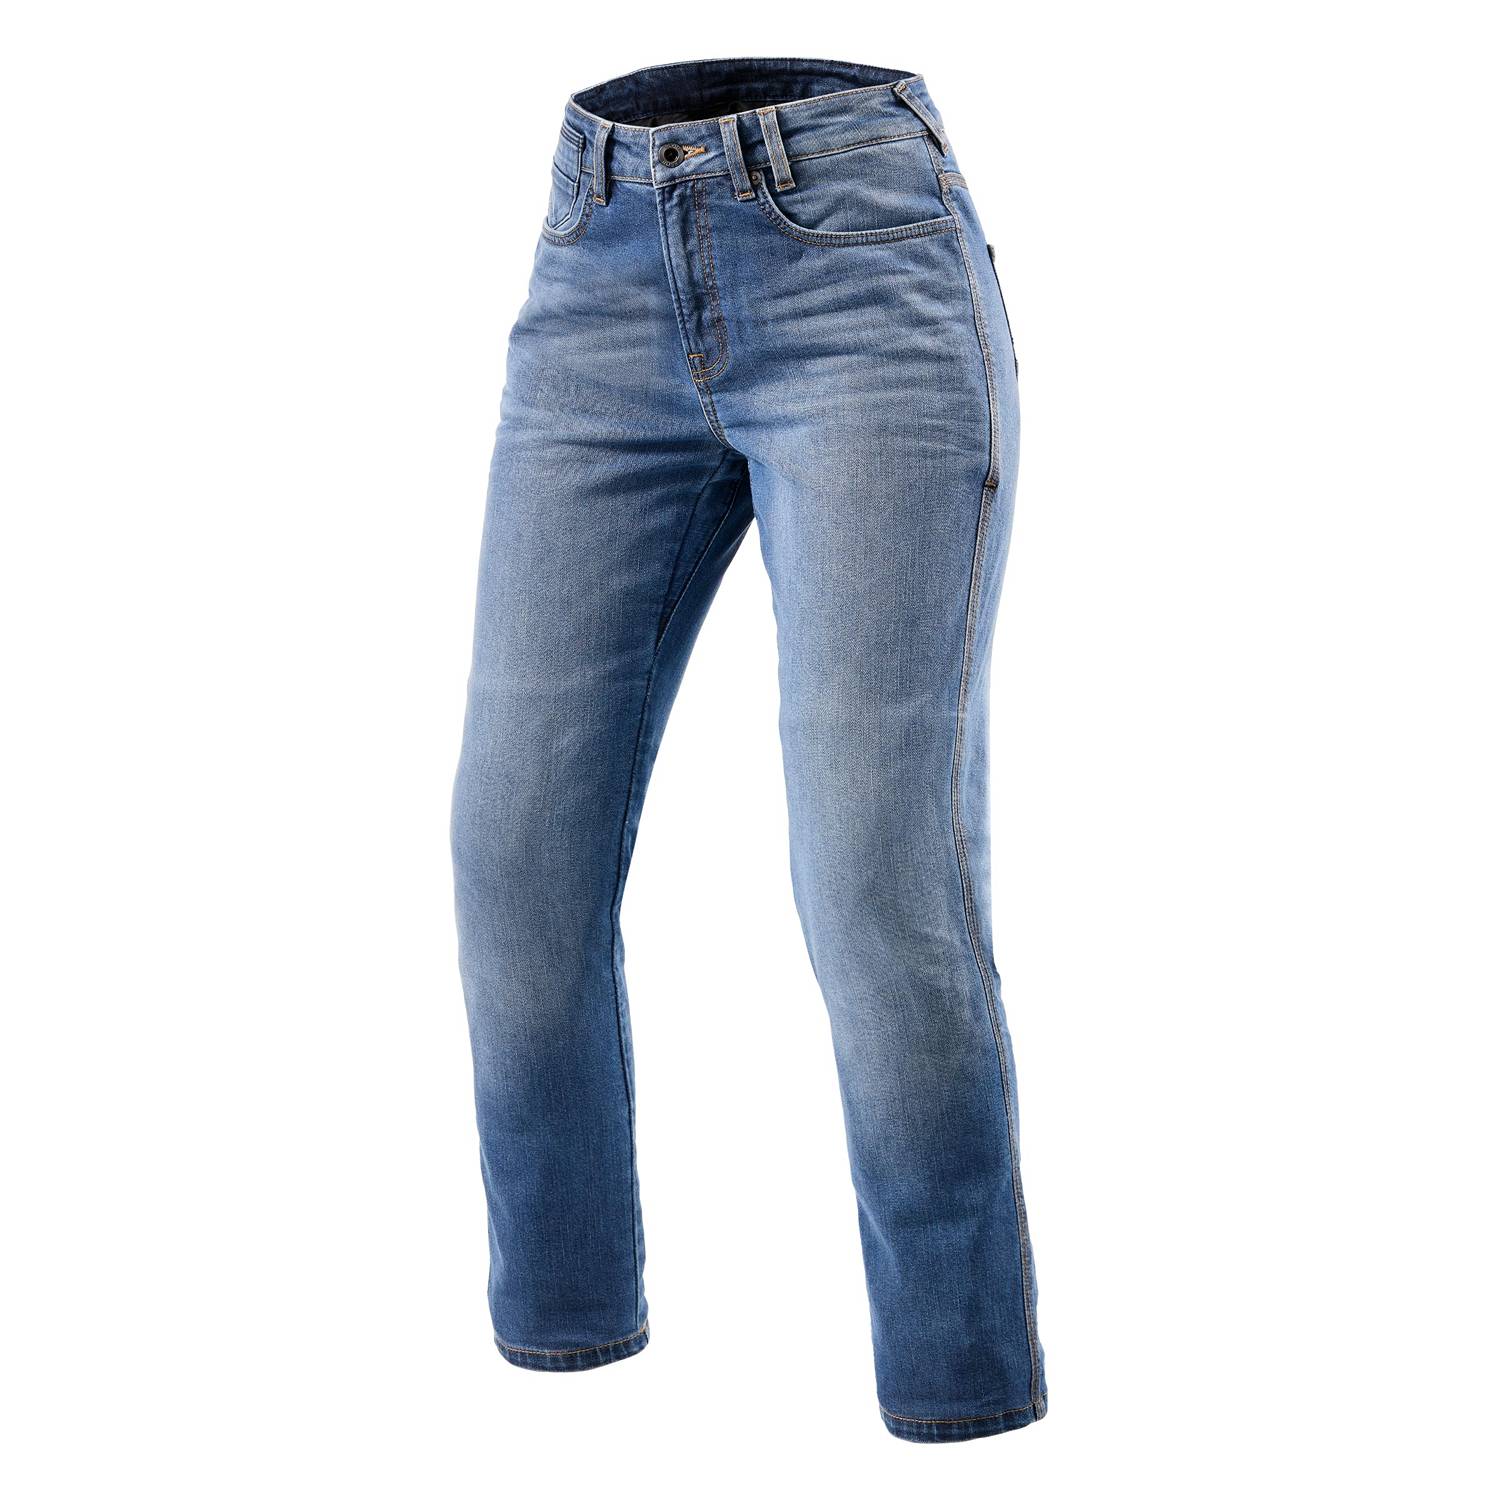 Image of REV'IT! Jeans Victoria 2 Ladies SF Classic Blue Used Motorcycle Jeans Größe L30/W26